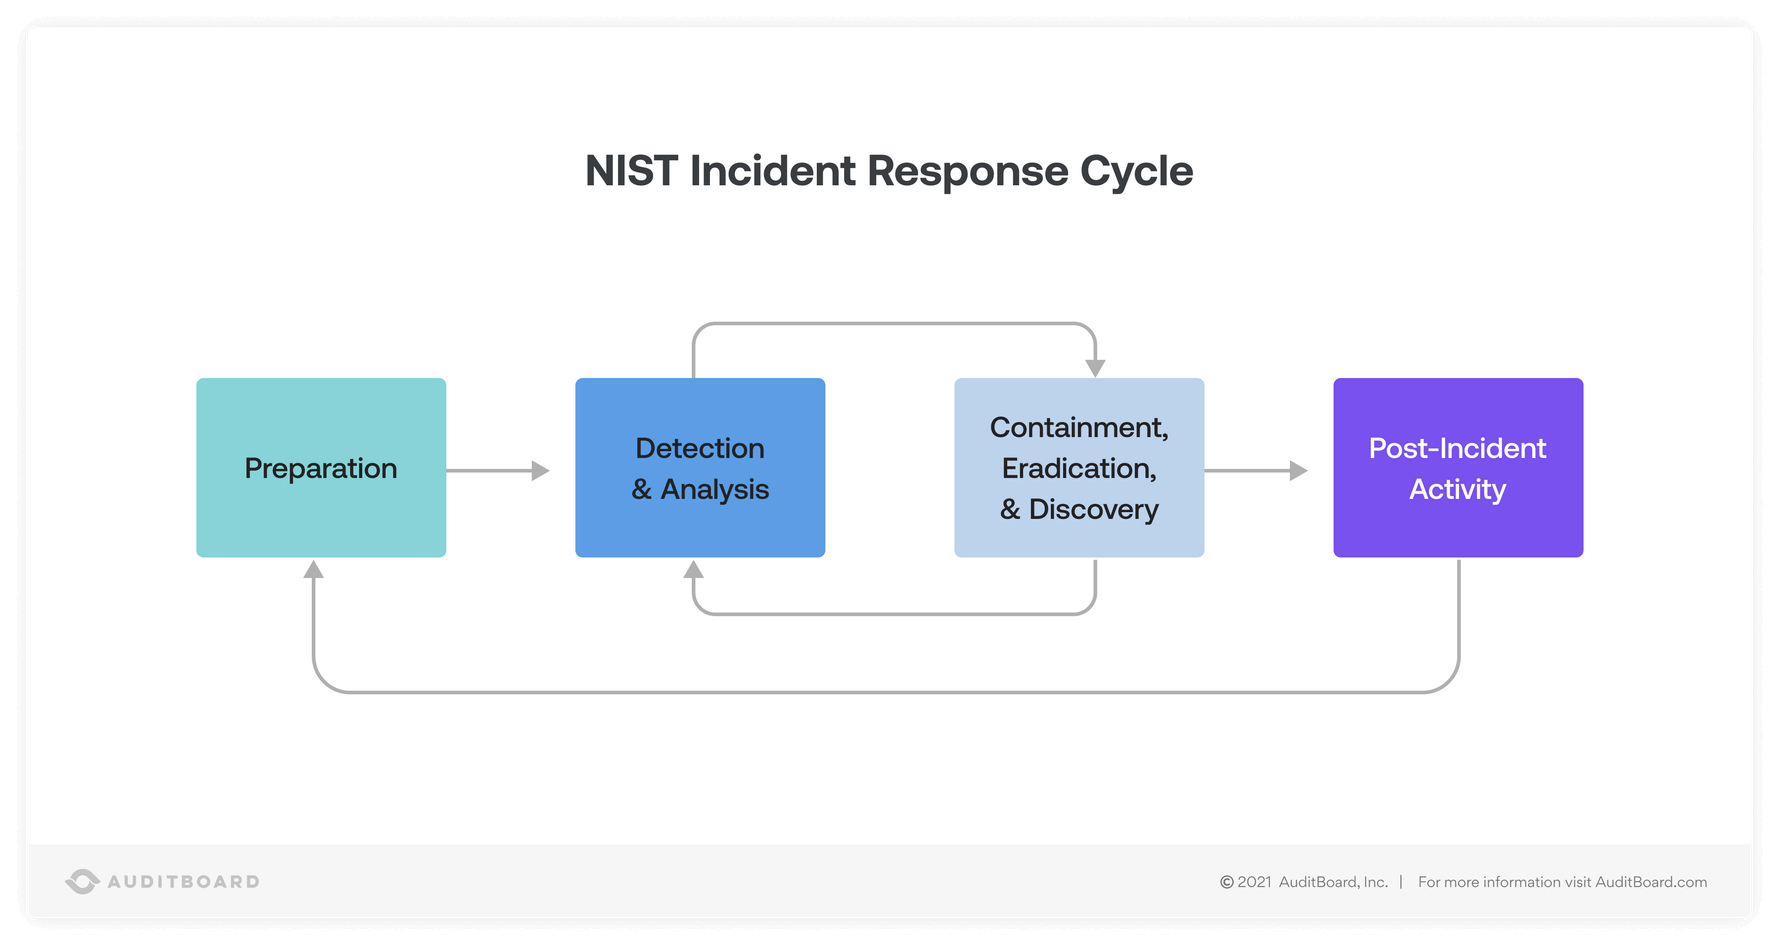 Learning from incidents